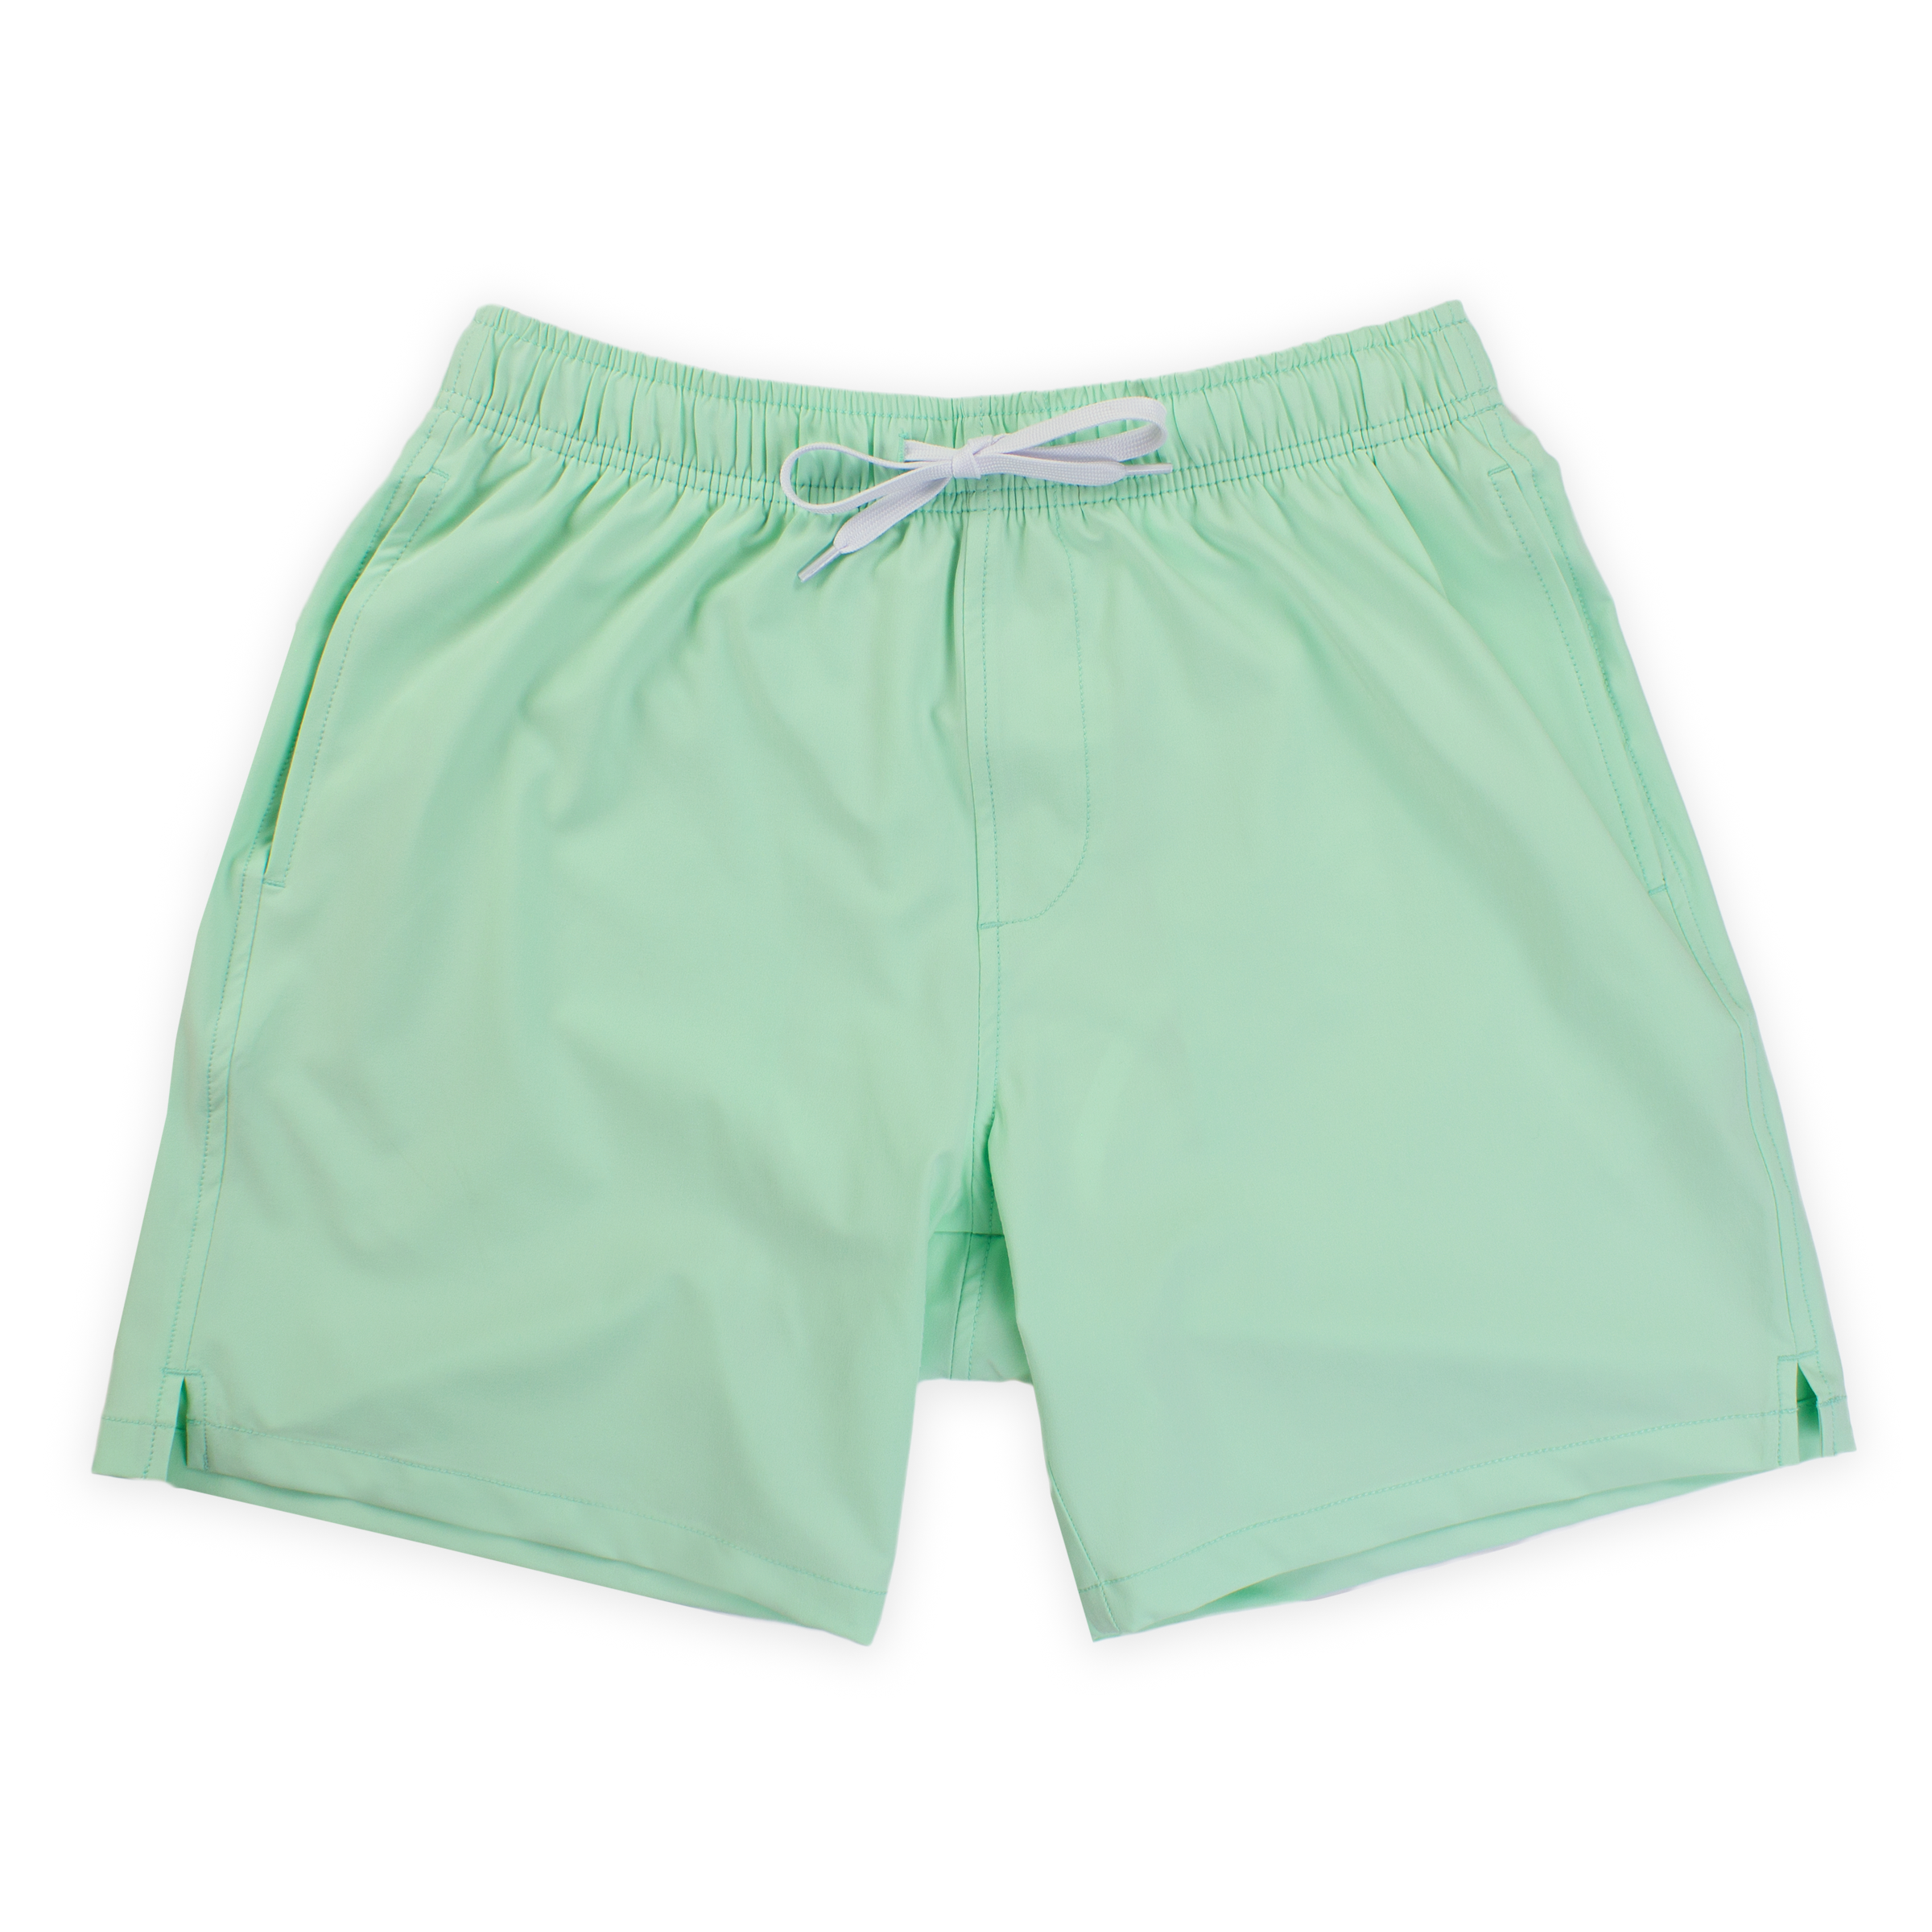 Stretch Swim 7" in Mint light green front with elastic waistband, white drawstring, and two inseam pockets